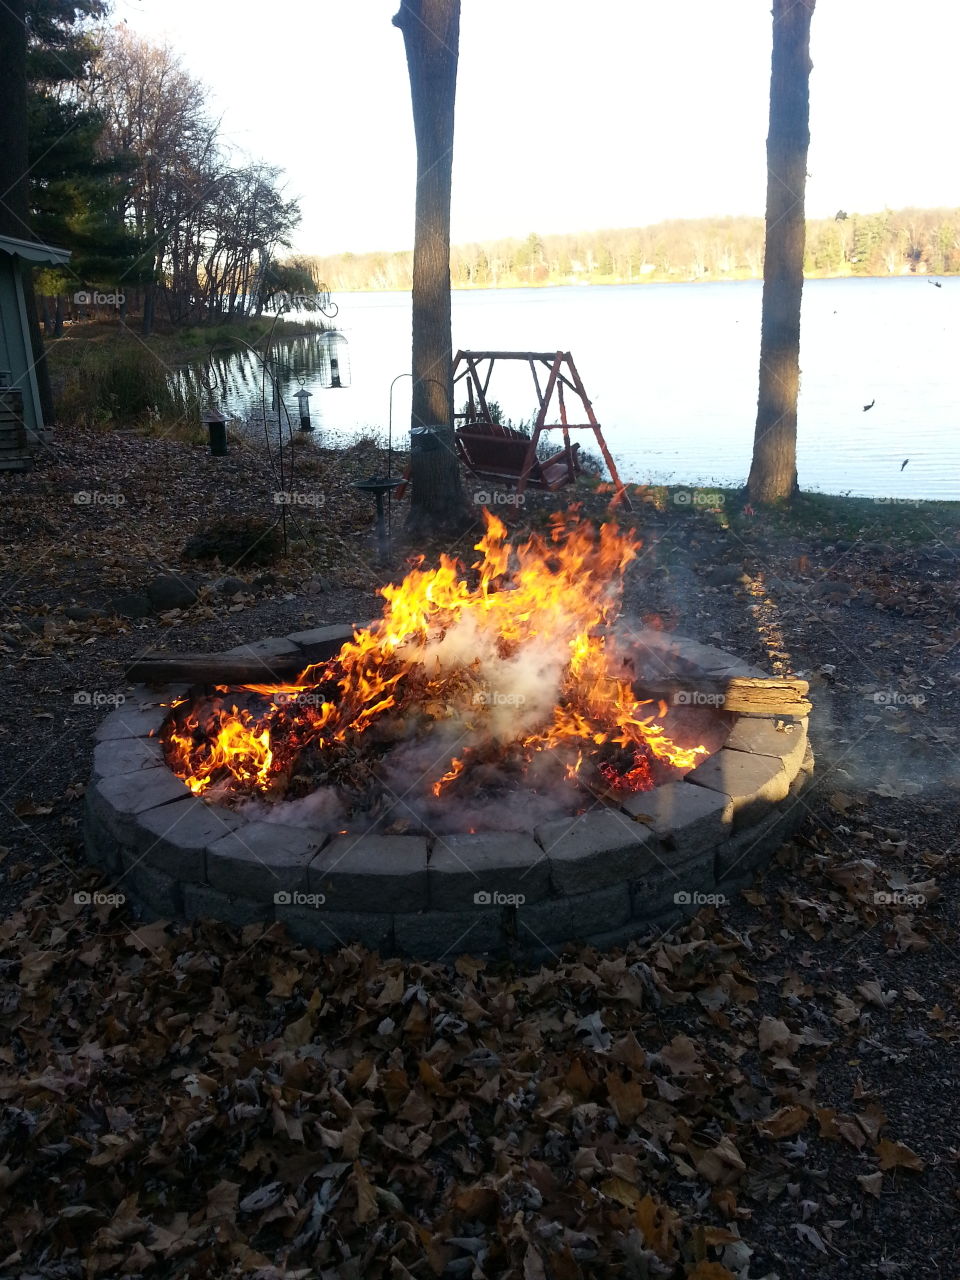 Fire and water. camp fire, lake, peace and quiet equals perfection